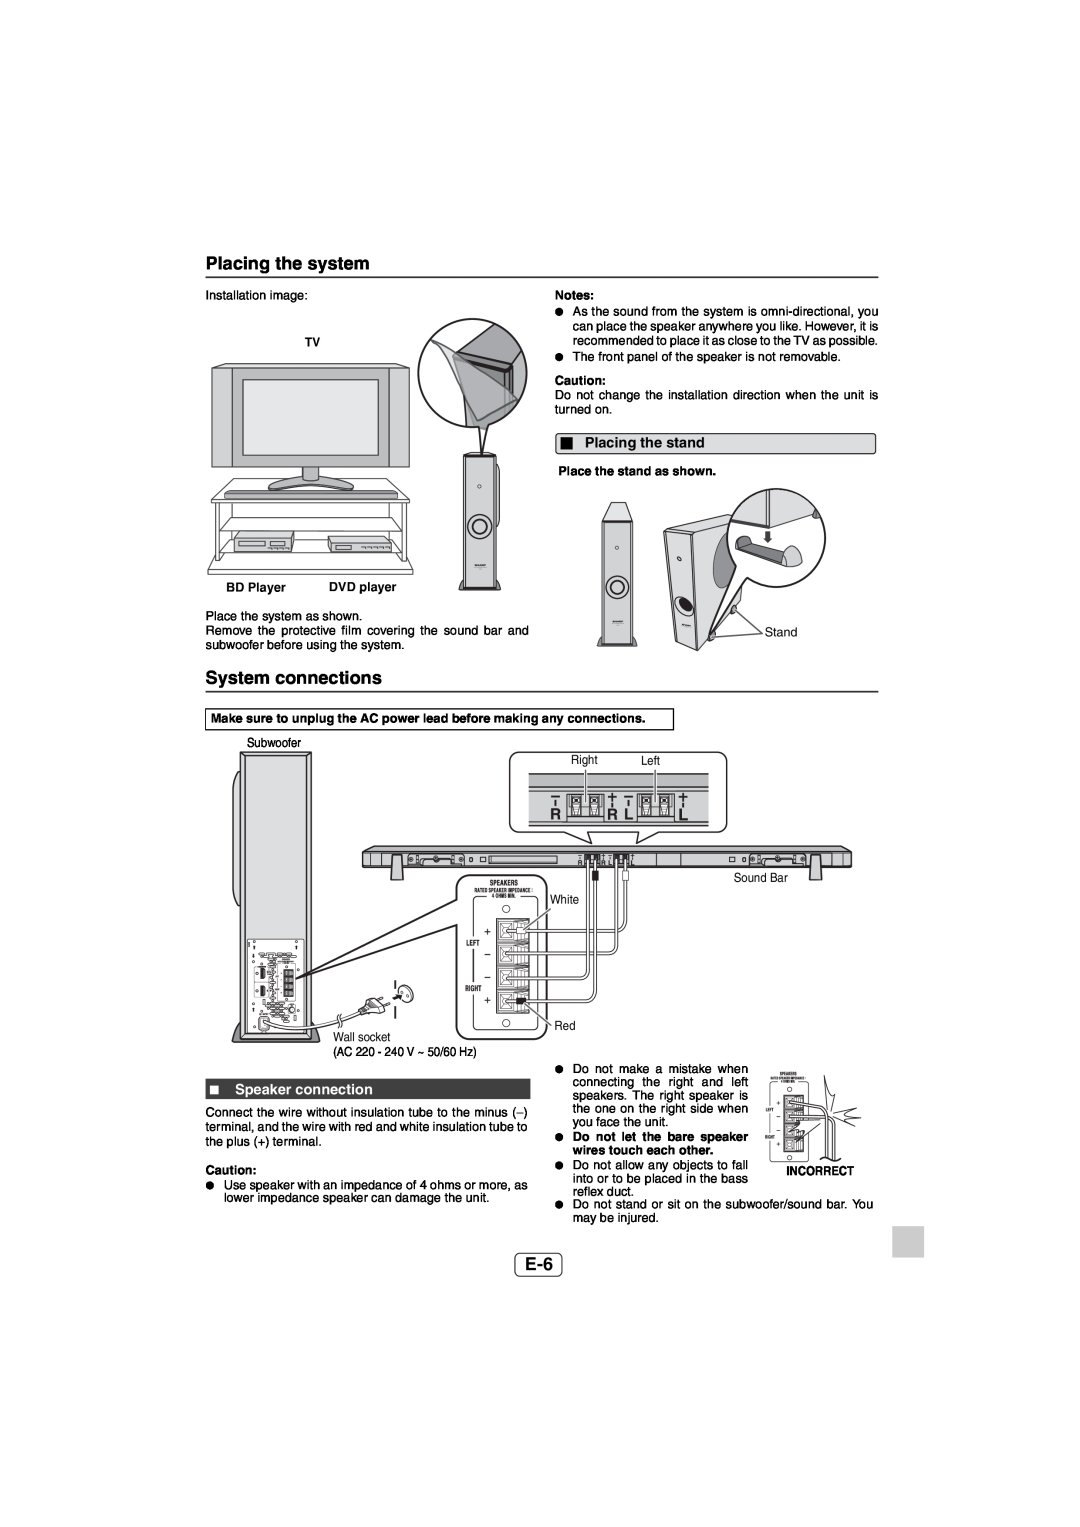 Sharp HT-SL50 operation manual Placing the system, System connections, Placing the stand, Speaker connection 